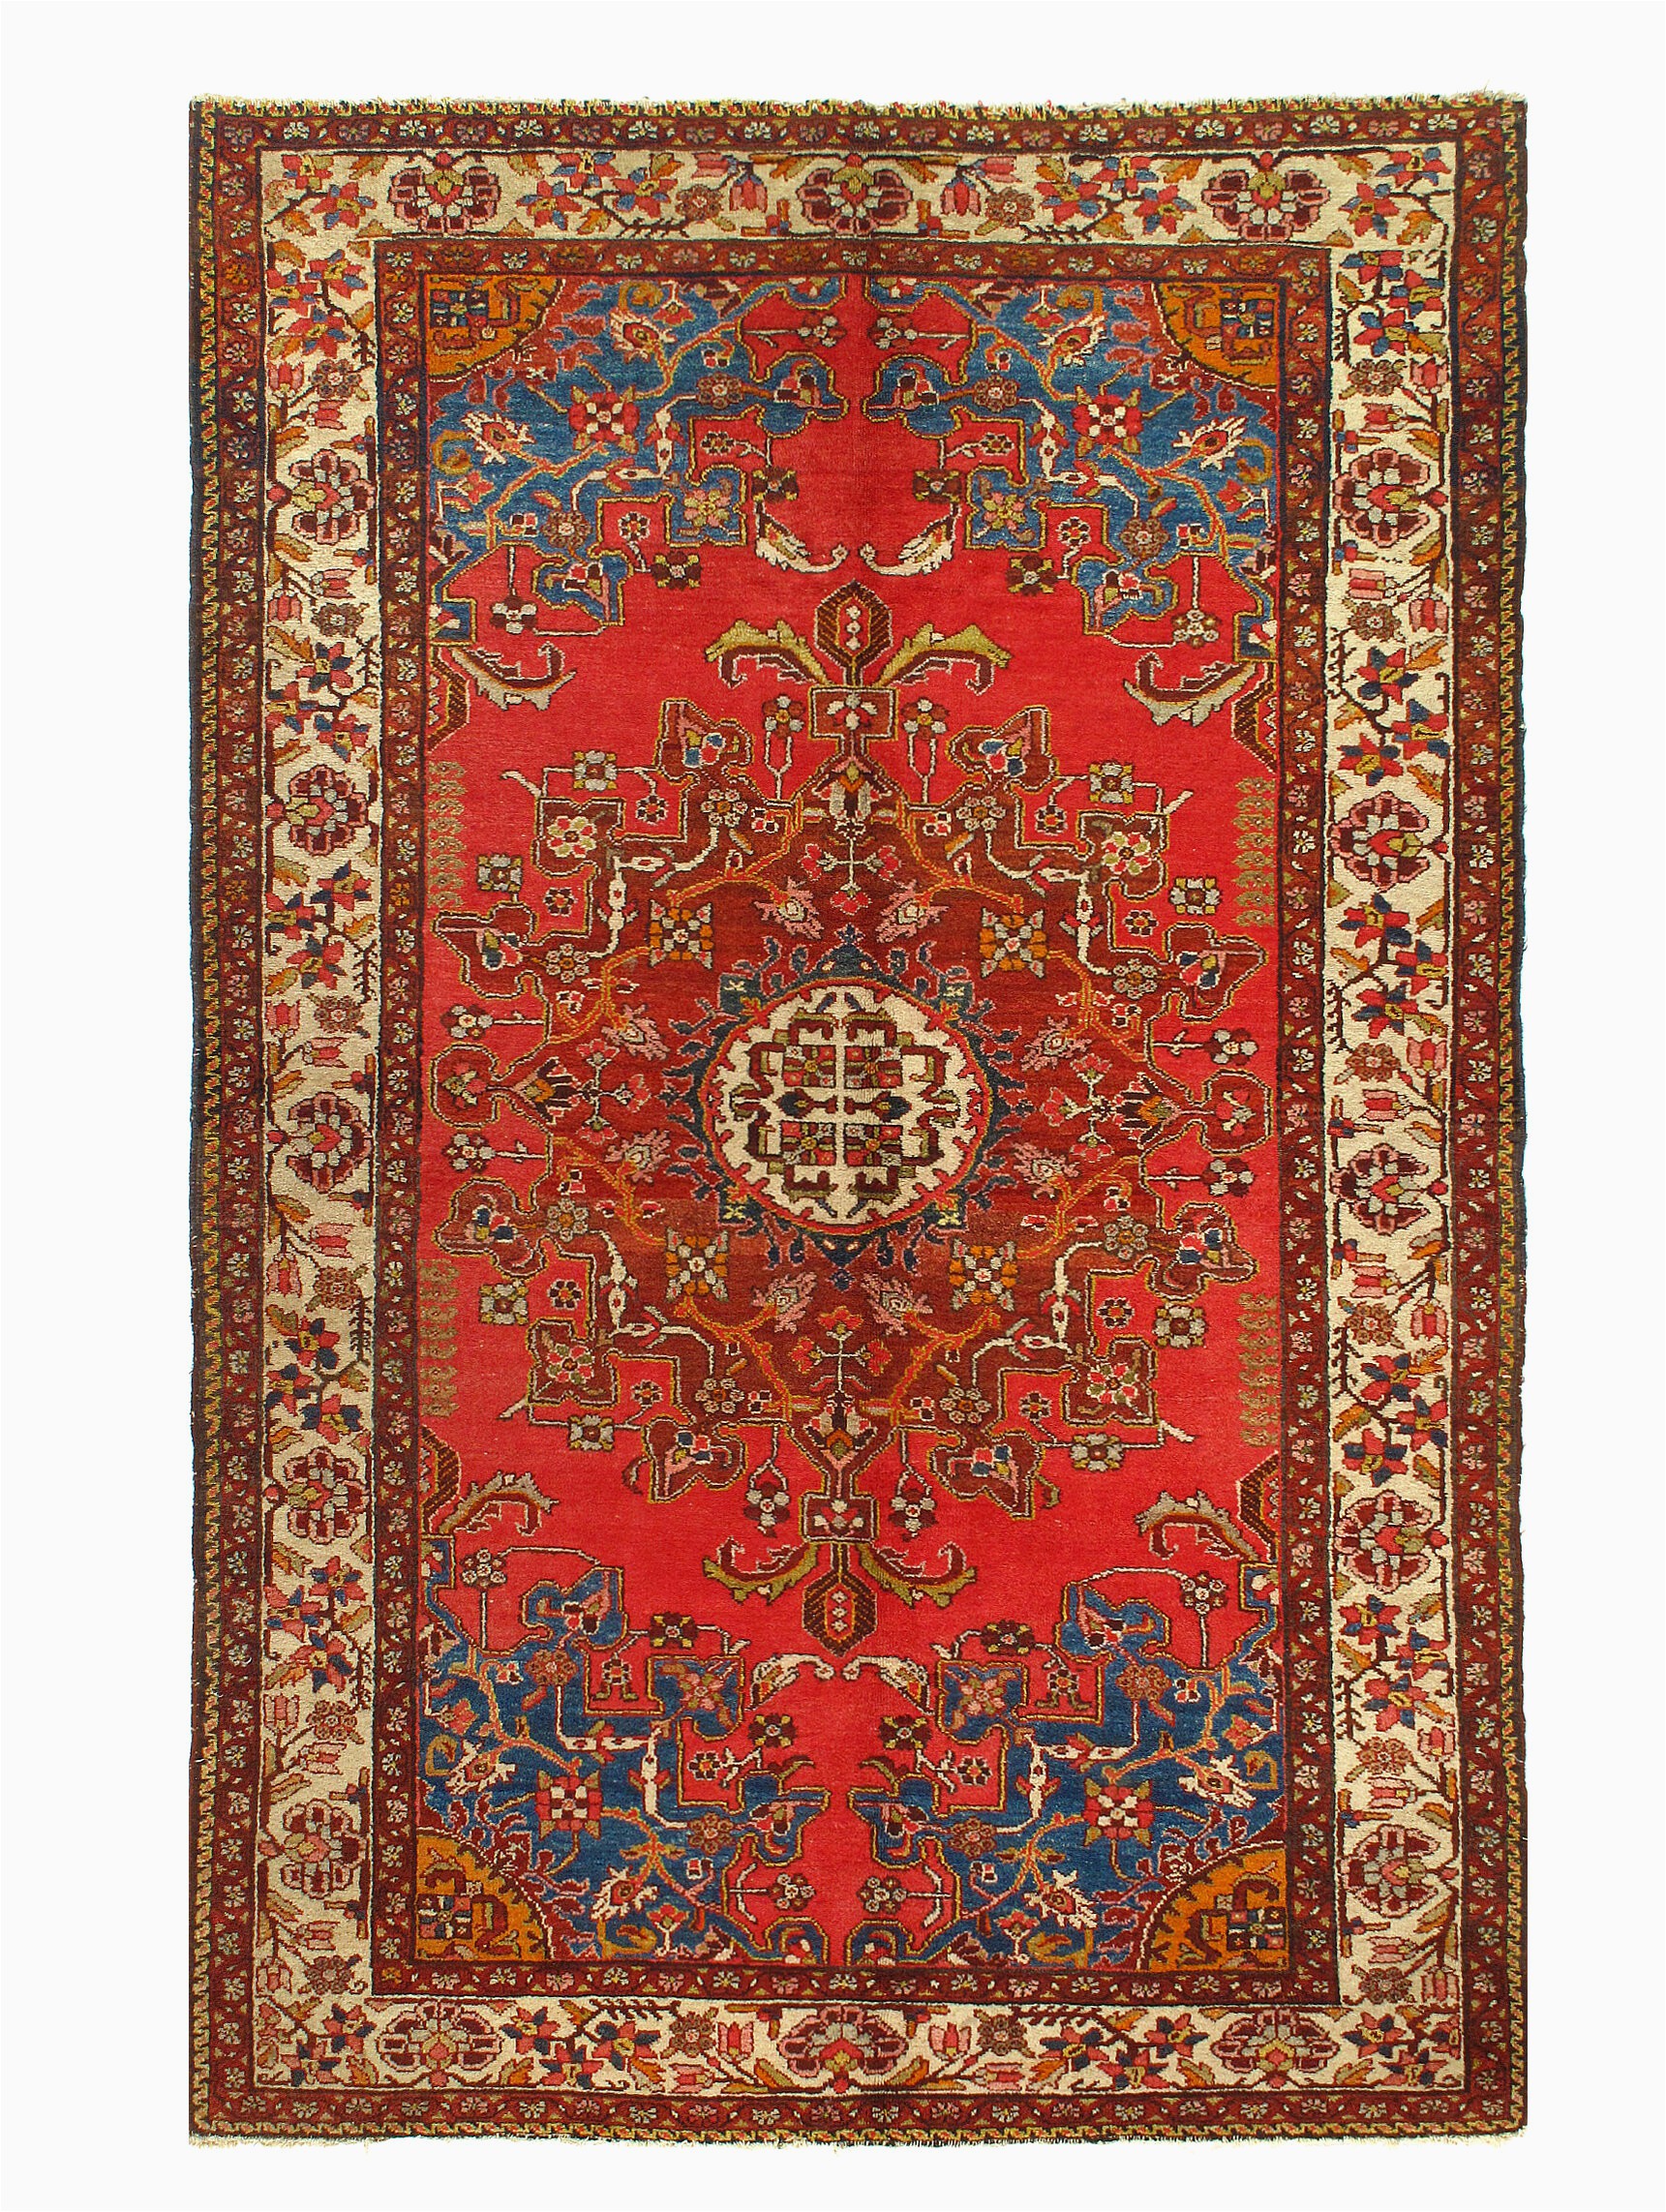 36 X 36 area Rug E Of A Kind Verge Hand Knotted Red 1 3" X 3 6" area Rug